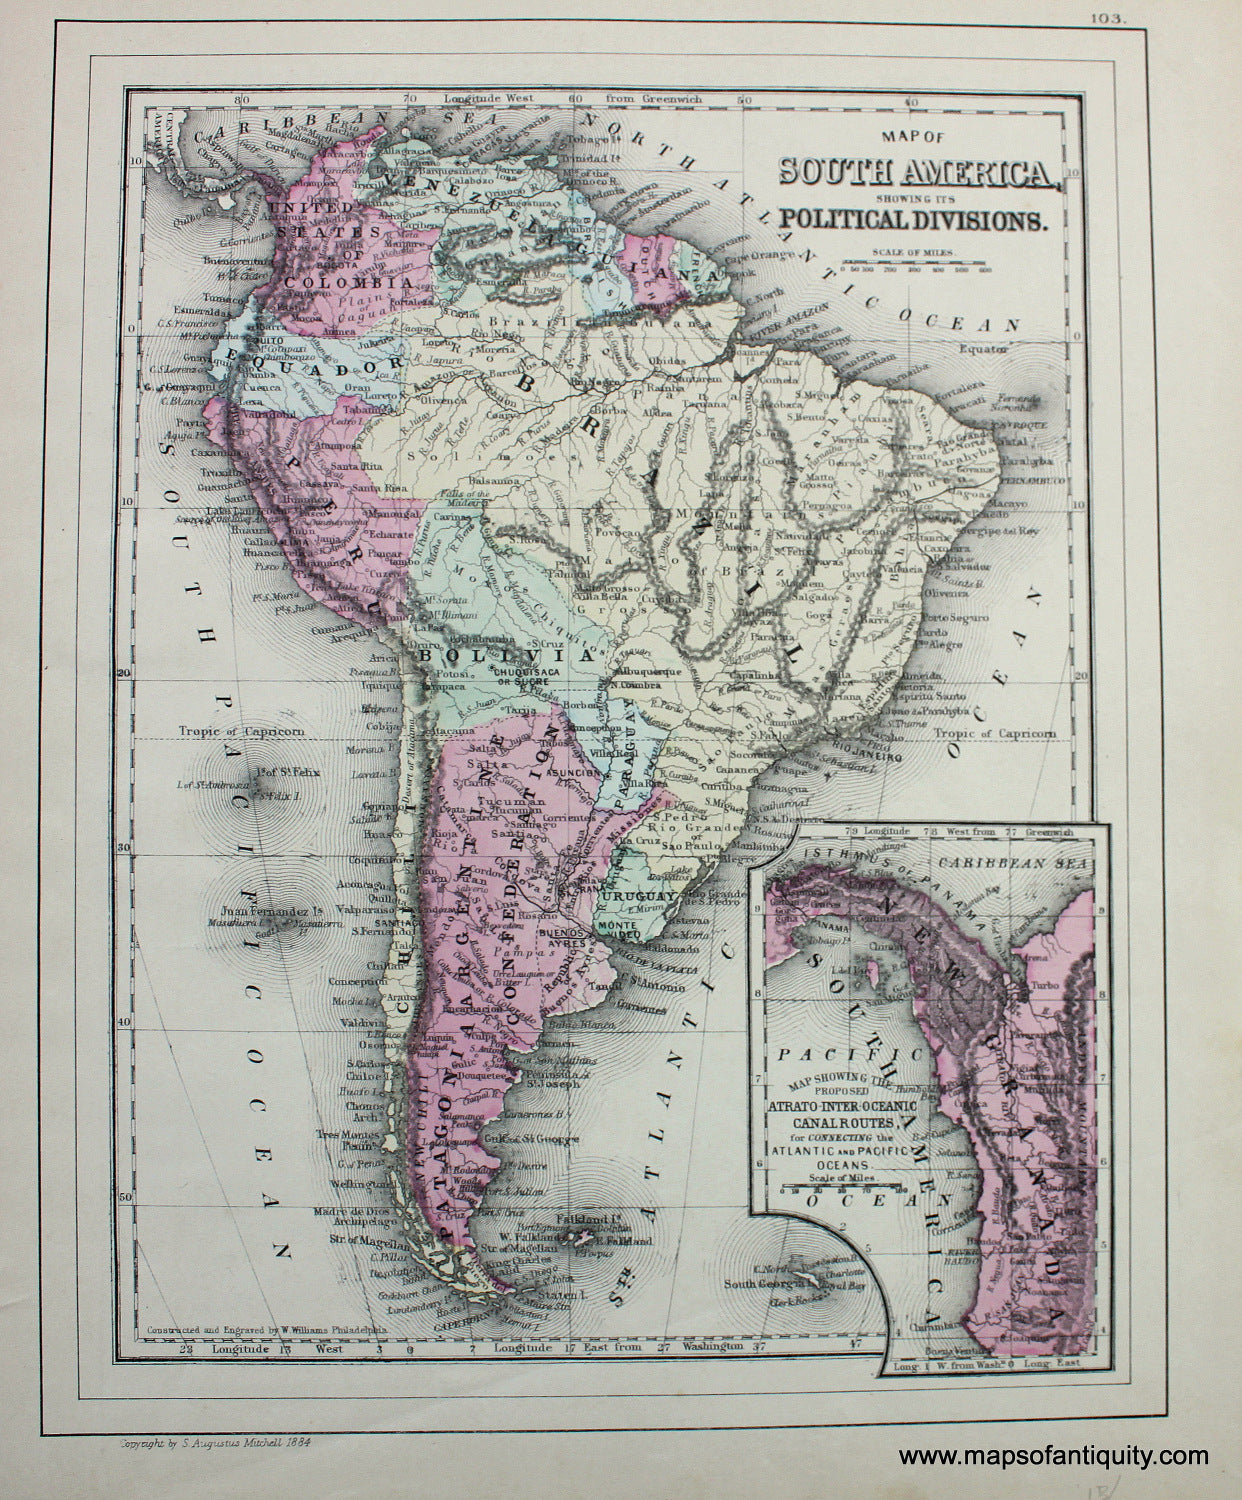 Antique-Hand-Colored-Map-Map-of-South-America-Showing-its-Political-Divisions-with-inset-Map-Showing-the-Proposed-Atrato-Inter-Oceanic-Canal-Routes-for-Connecting-the-Atlantic-and-Pacific-Oceans.--South-America-South-America-General-1885-Mitchell-Maps-Of-Antiquity